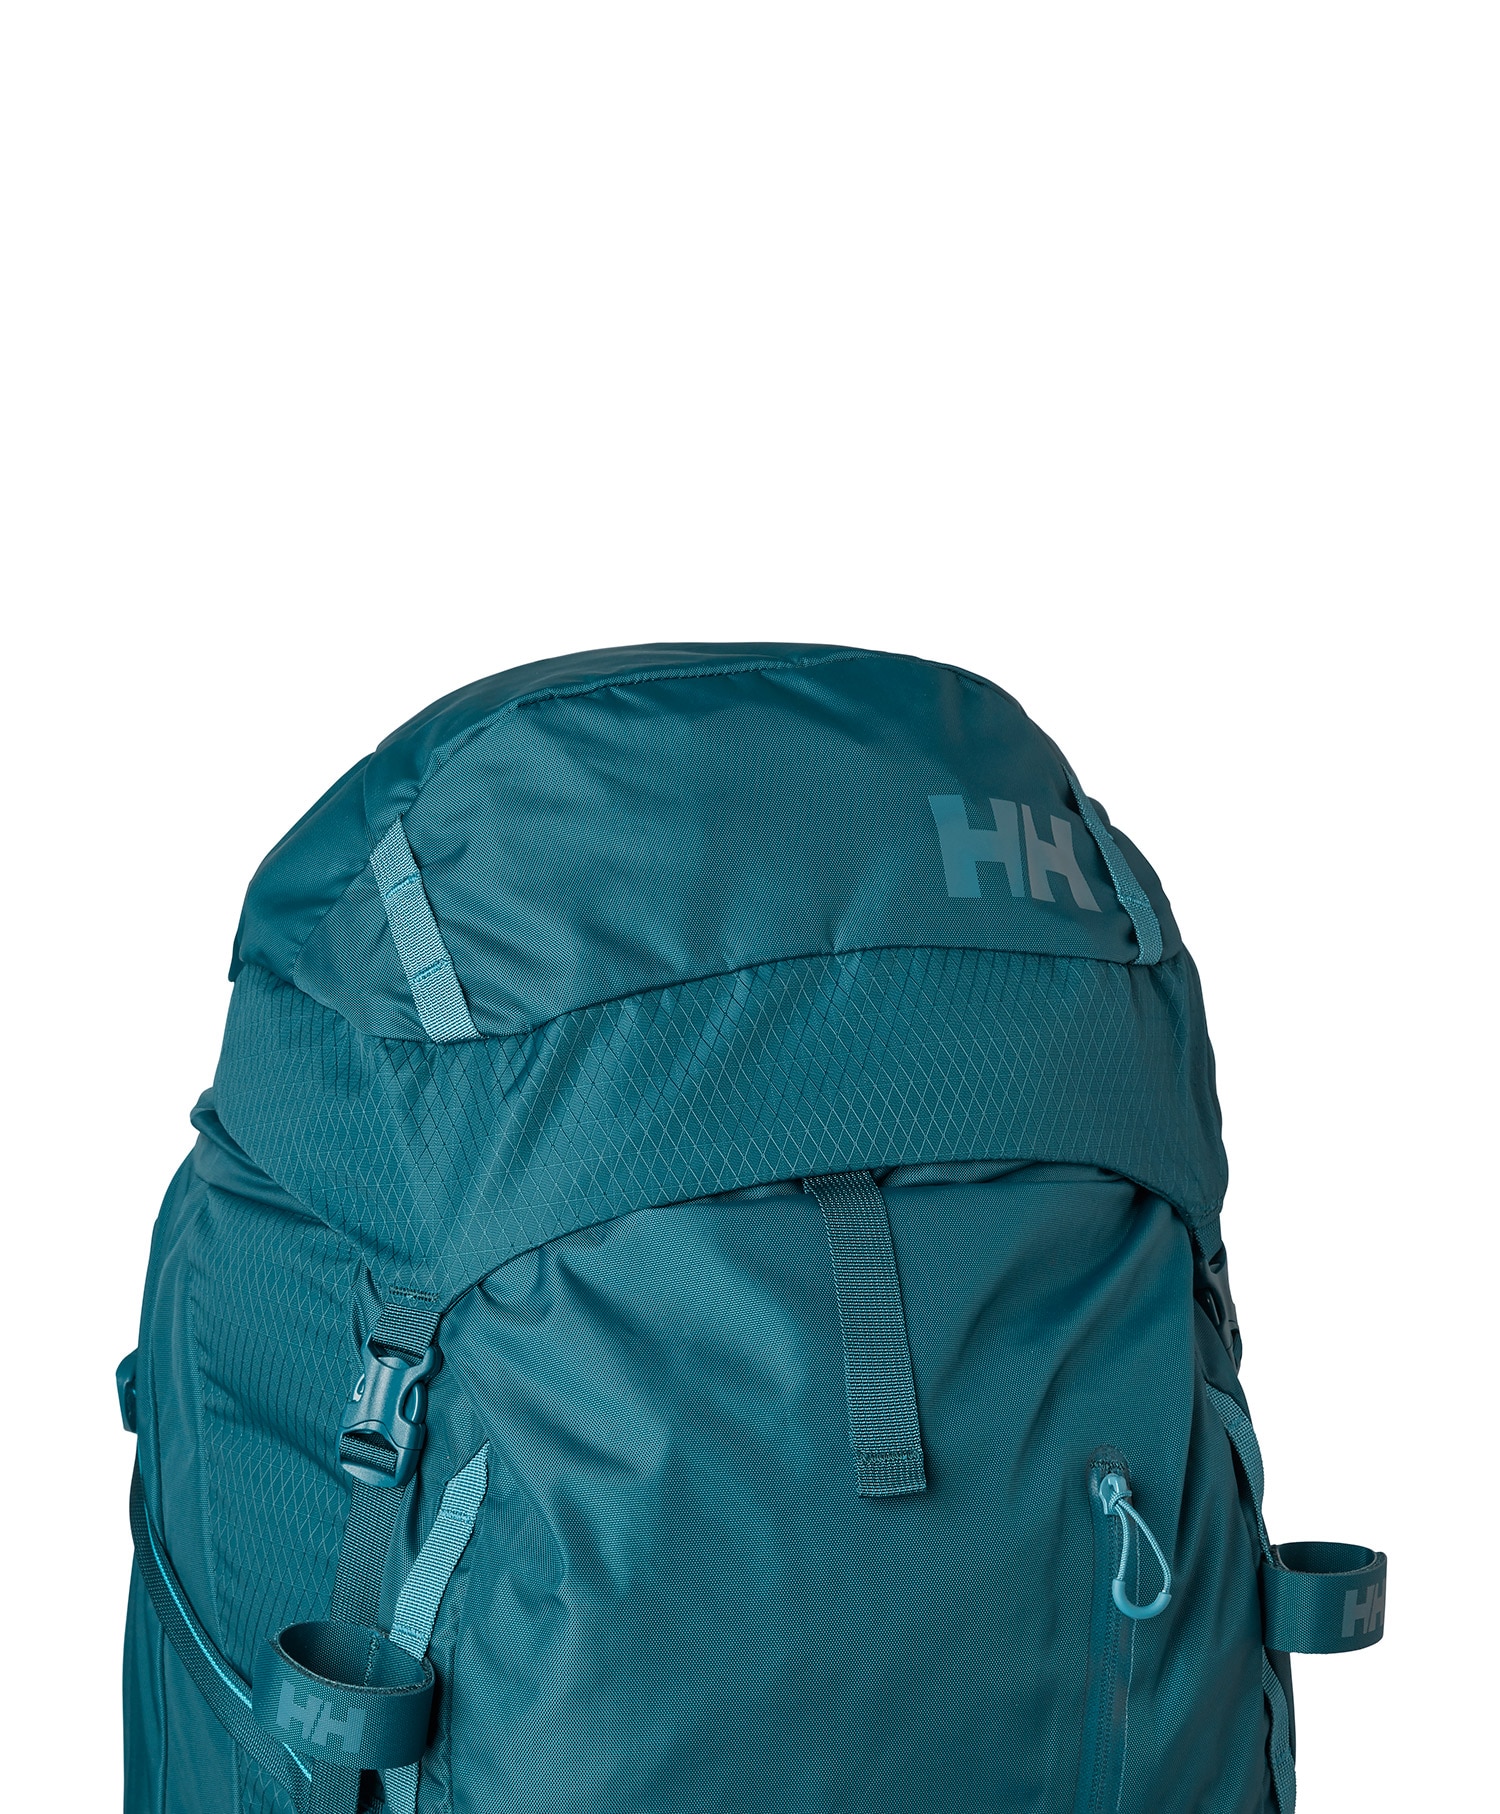 Helly Hansen Capacitor Backpack 65L